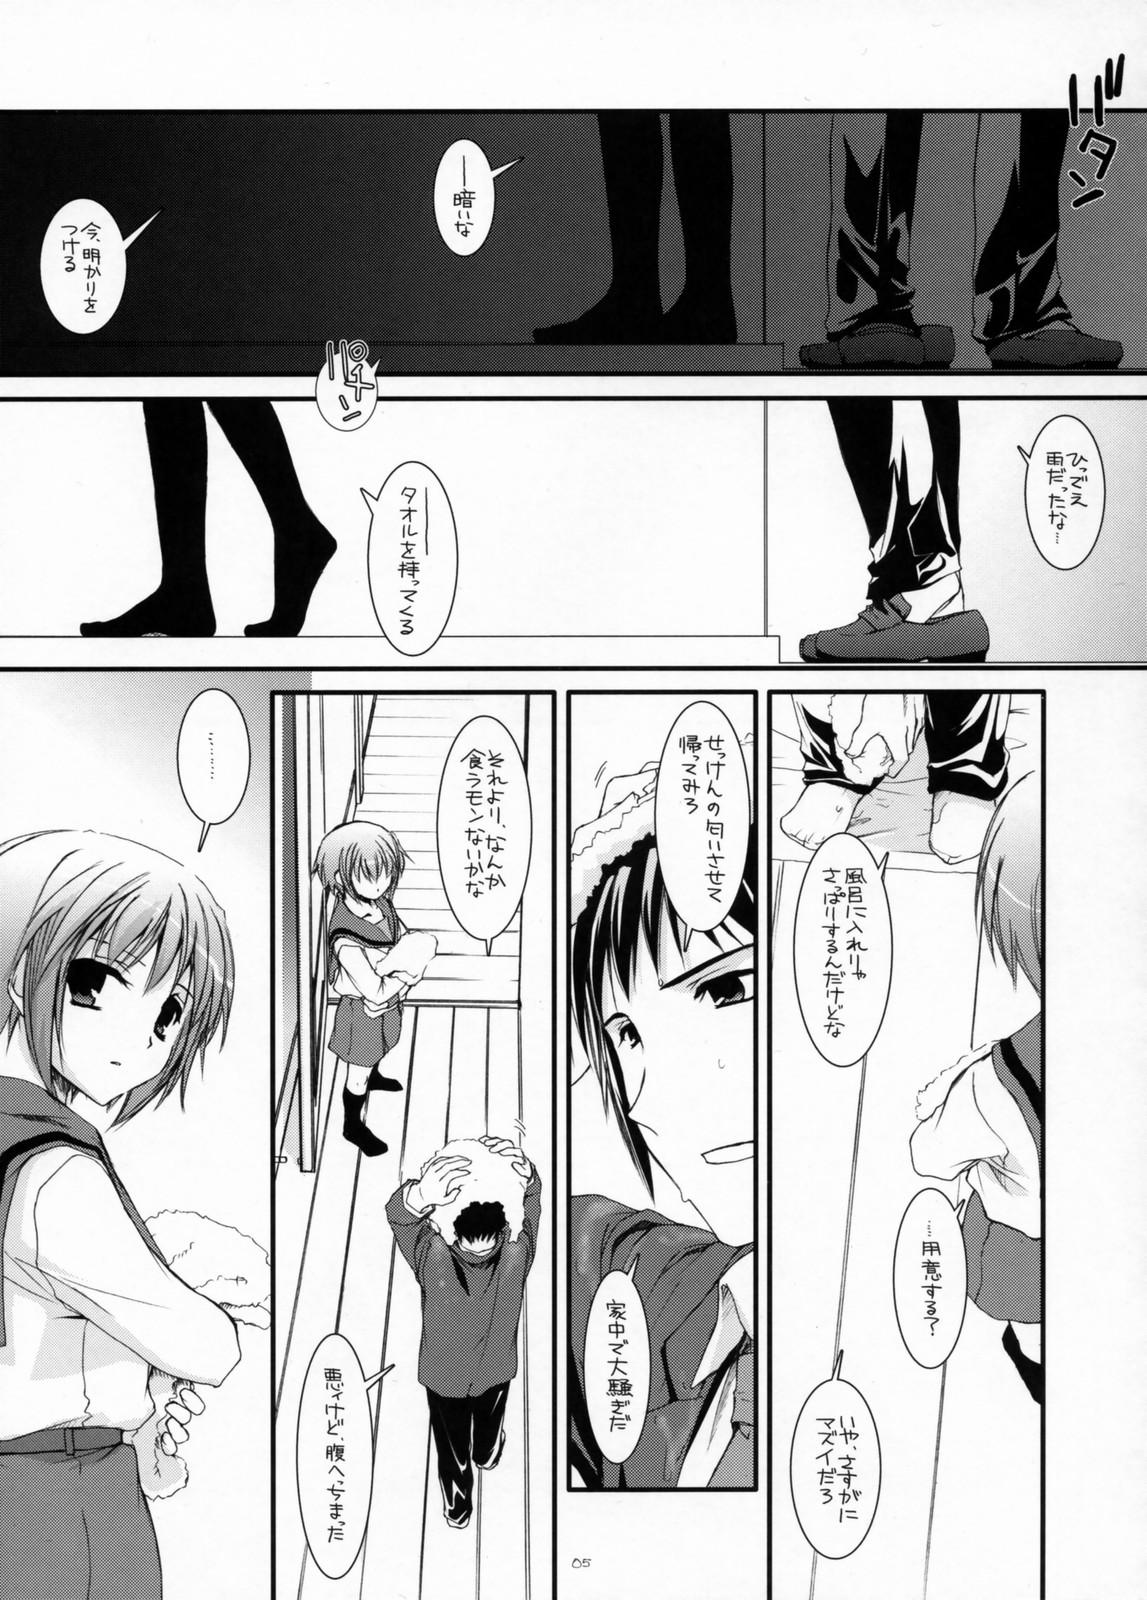 Striptease D.L.Action 38 - The melancholy of haruhi suzumiya Woman - Page 4